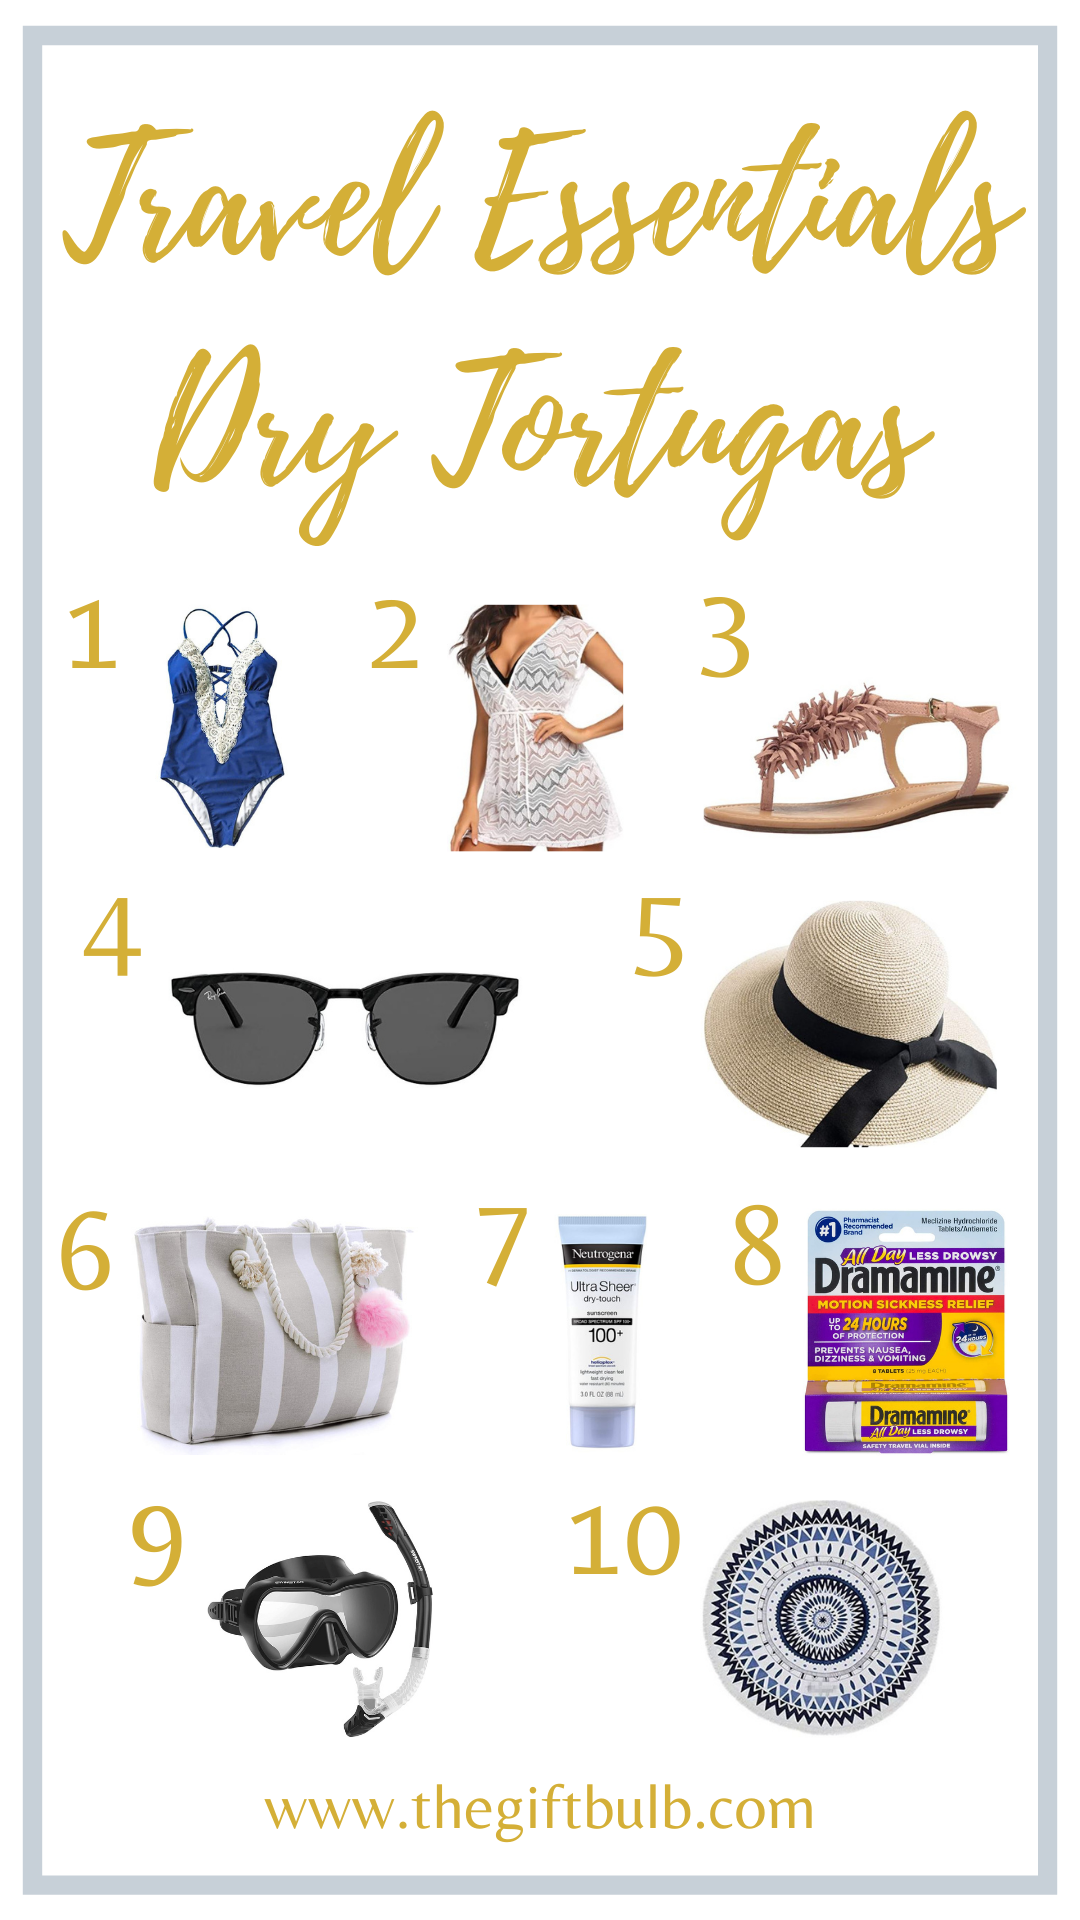 Travel Essentials for Dry Tortugas